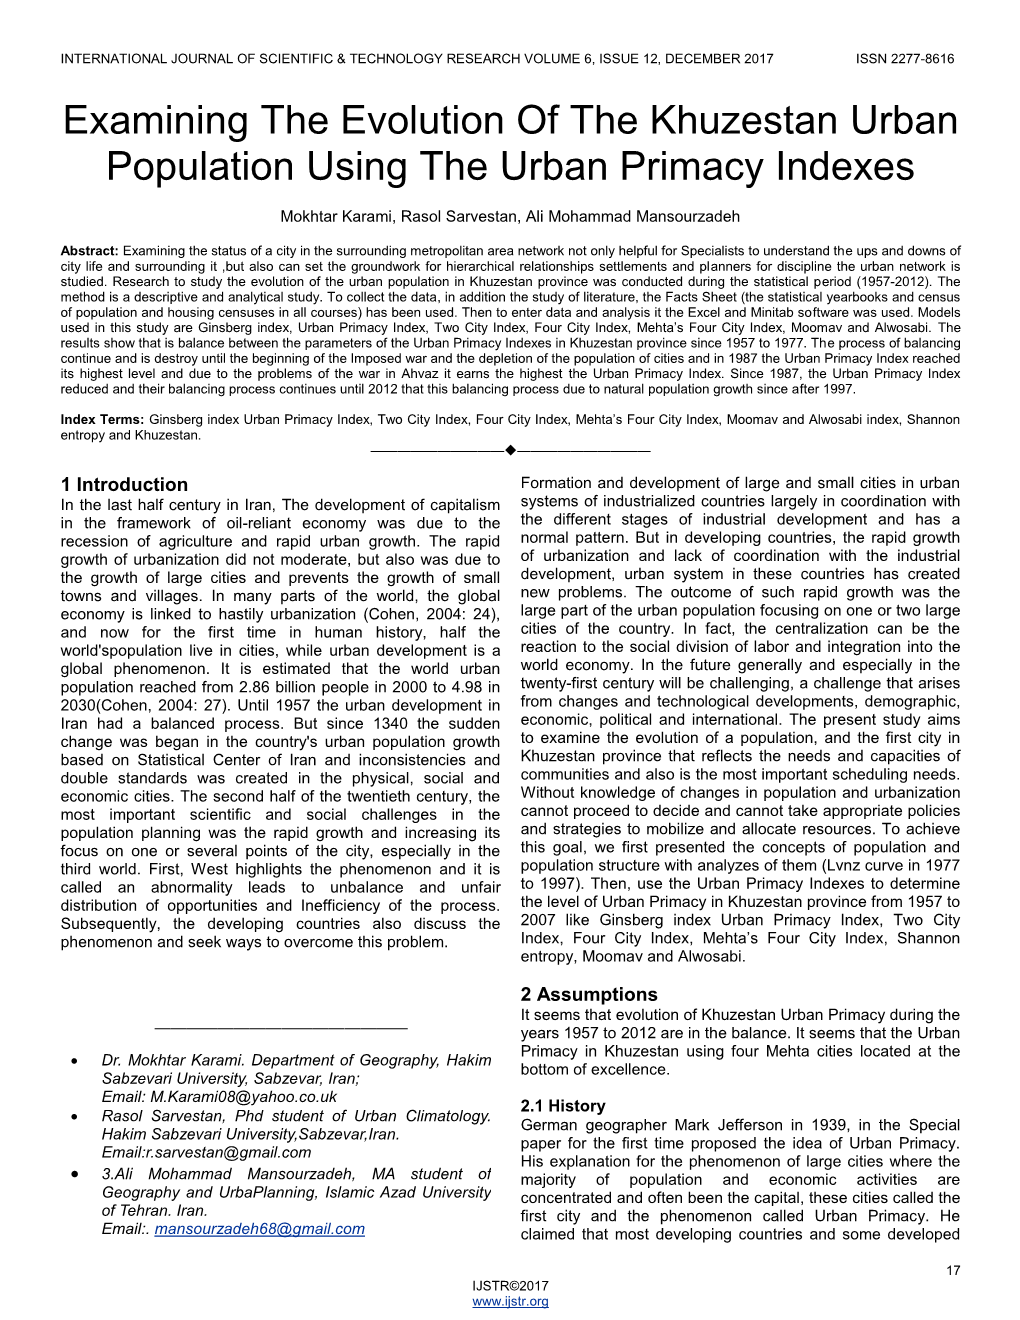 Examining the Evolution of the Khuzestan Urban Population Using the Urban Primacy Indexes